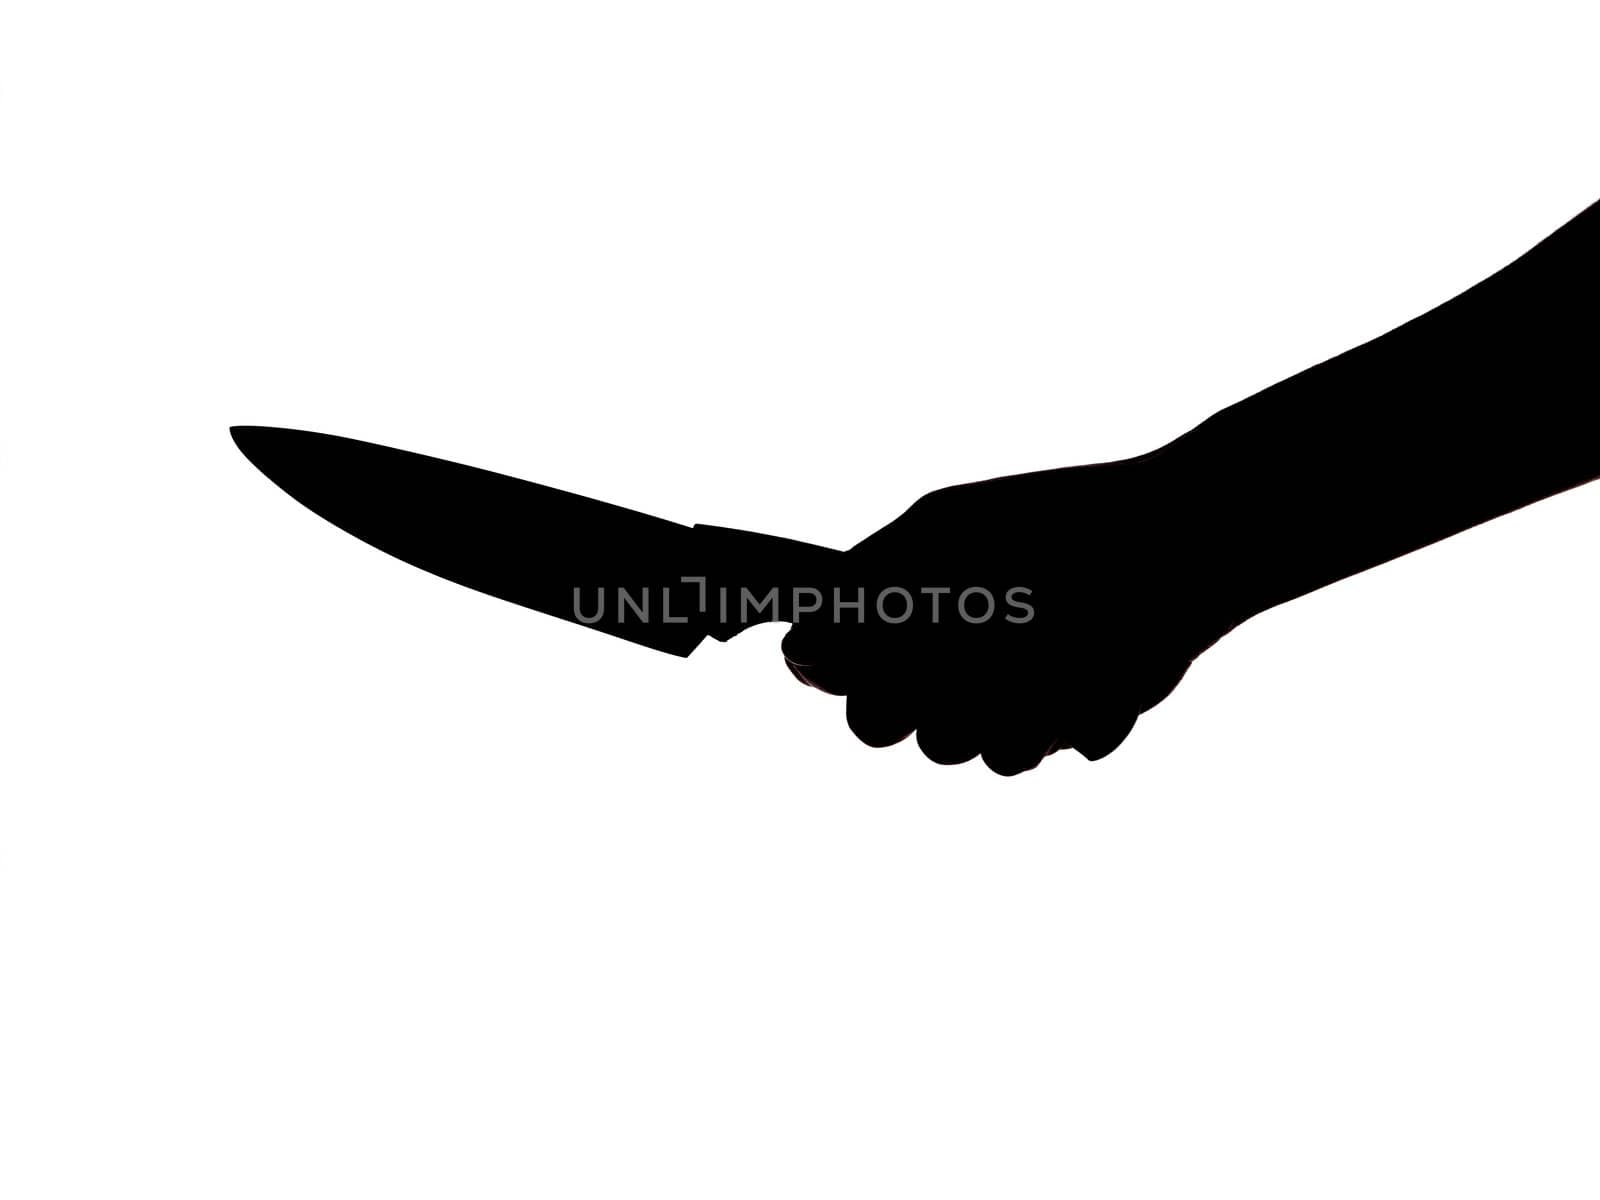 Silhouette of an hand holding a kitchen knife